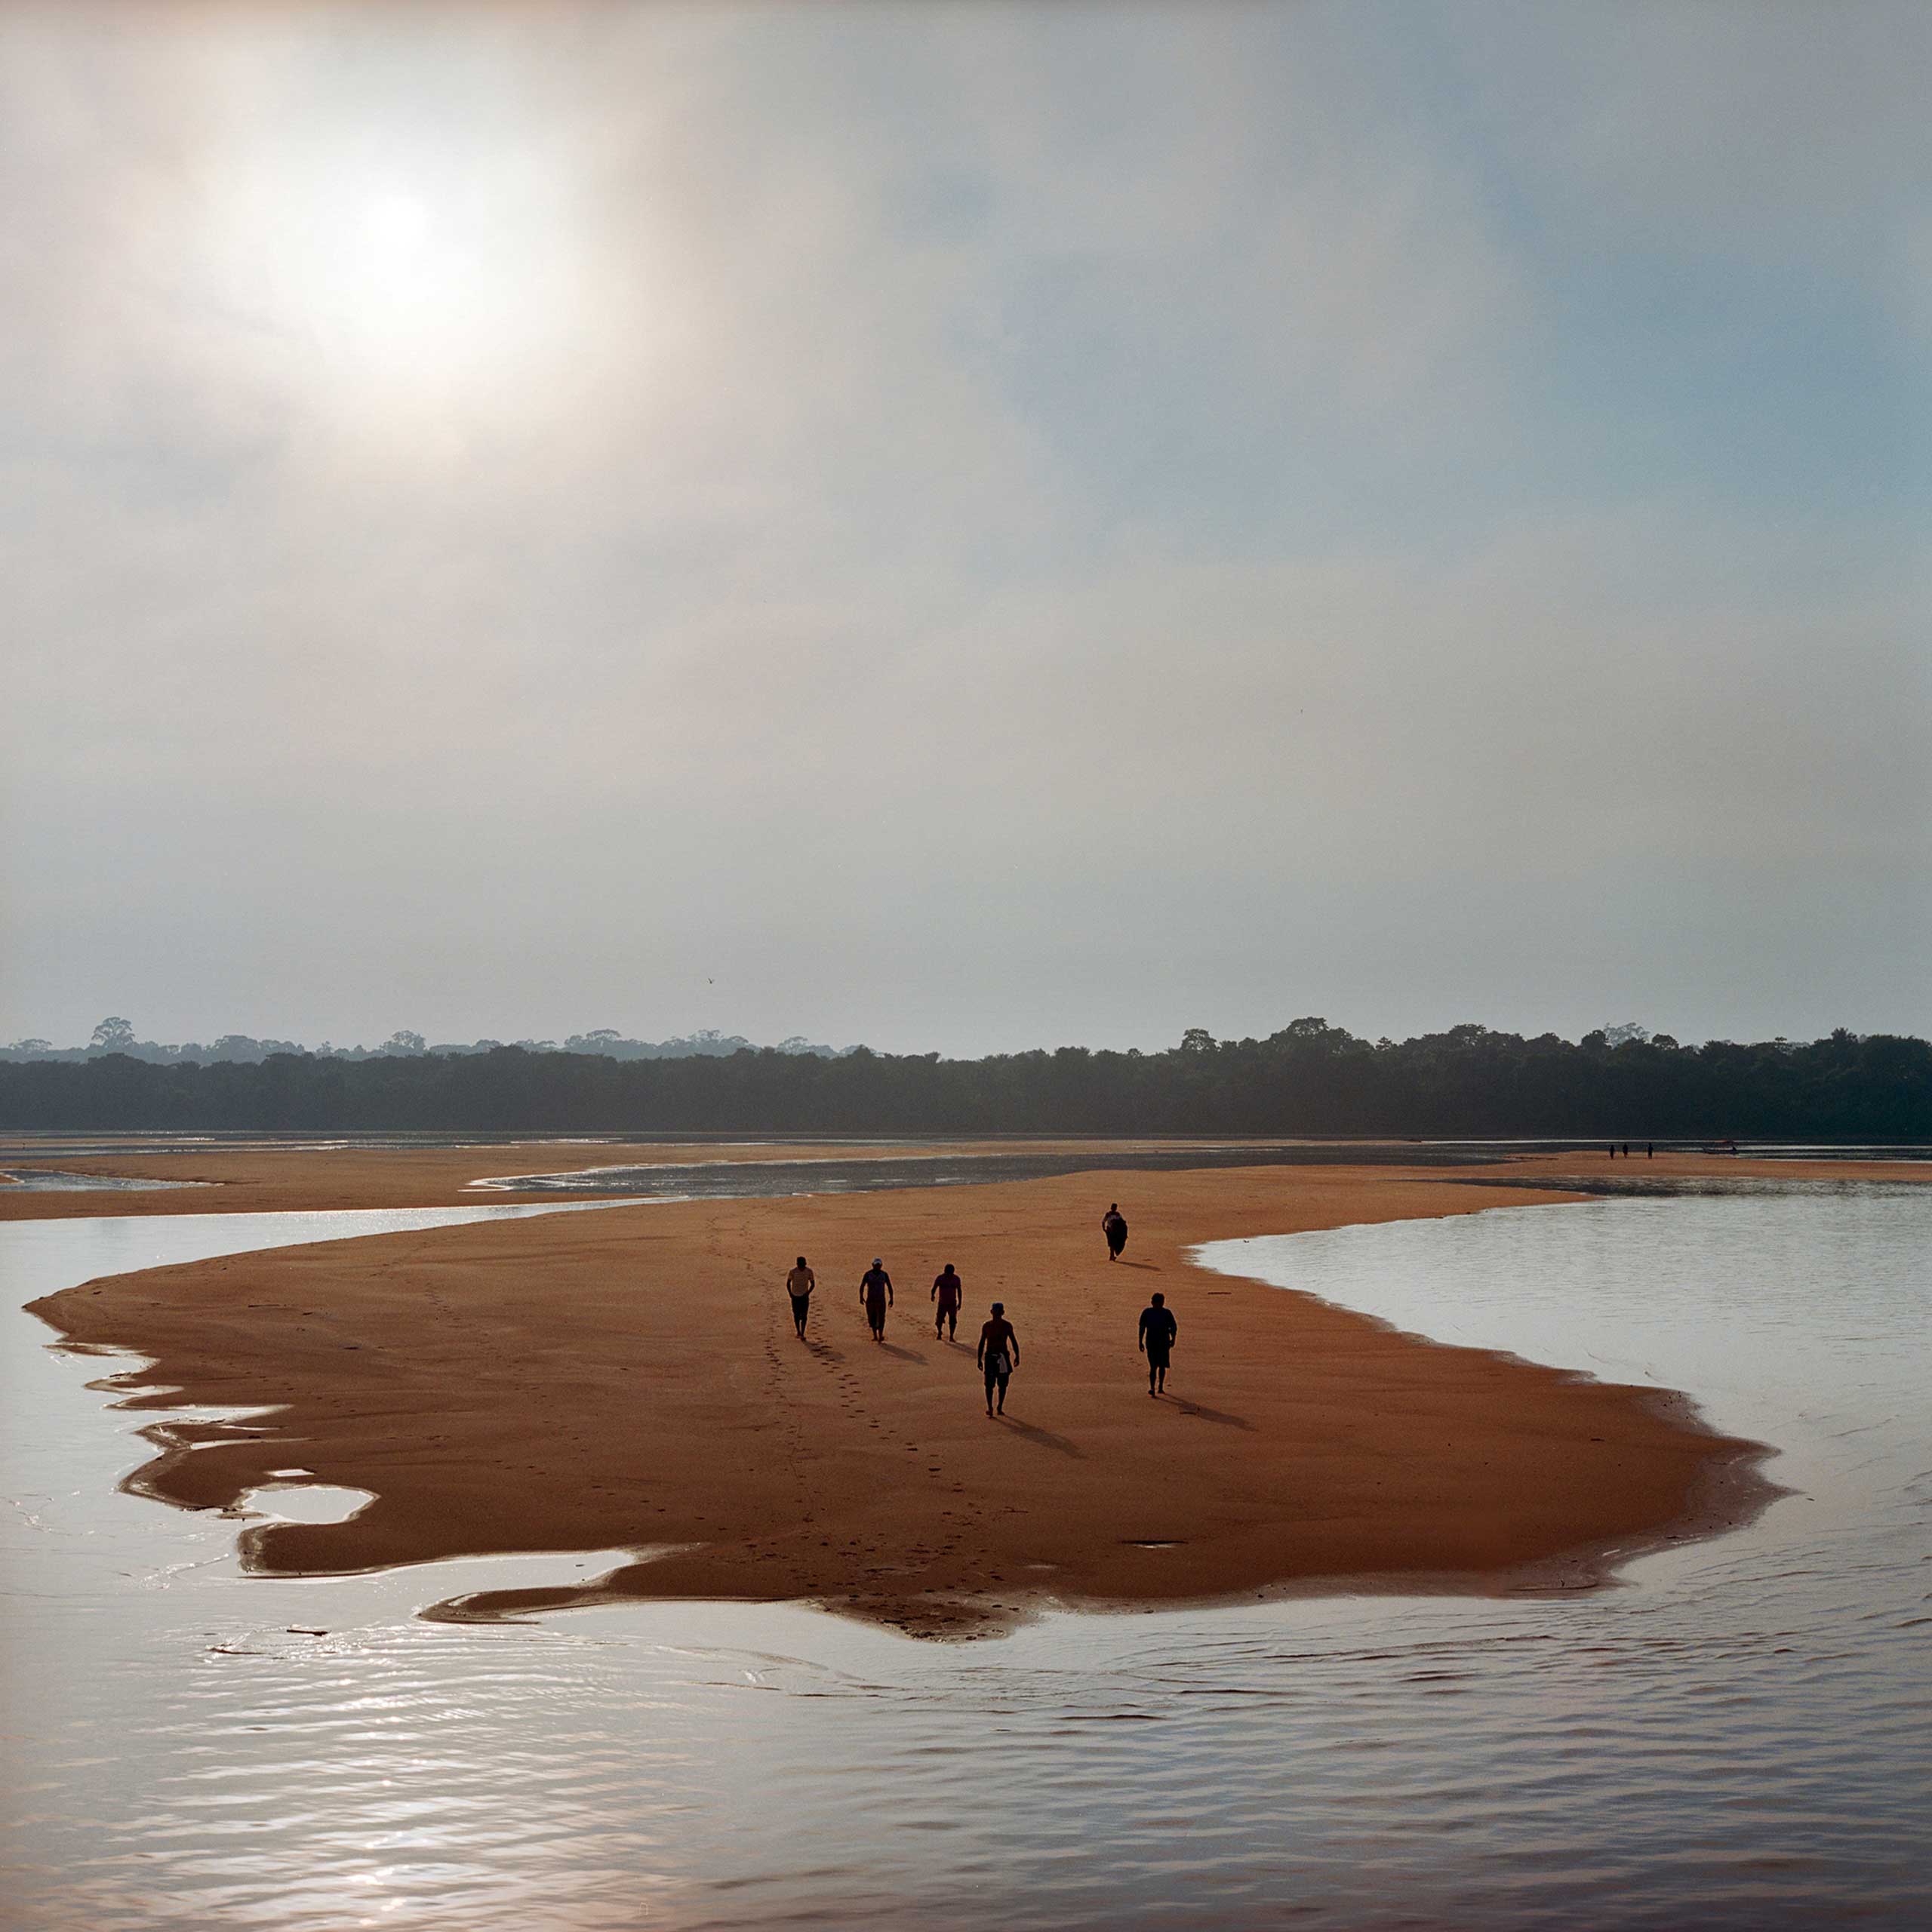 Members of the Munduruku indigenous tribe walk on a sandbar on the Tapajos River as they prepare for a protest against plans to construct a series of hydroelectric dams on the river in the Amazon rainforest in Para State, Brazil. The tribe members used the rocks to write 'Tapajos Livre' (Free Tapajos) in a large message in the sand in an action in coordination with Greenpeace. The Munduruku live traditionally along the river and depend on fishing and the river system for their livelihood. As their traditional lands are unrecognized by the government, they have little legal protection against development, but have vowed to fight against the dams, Nov. 2014.